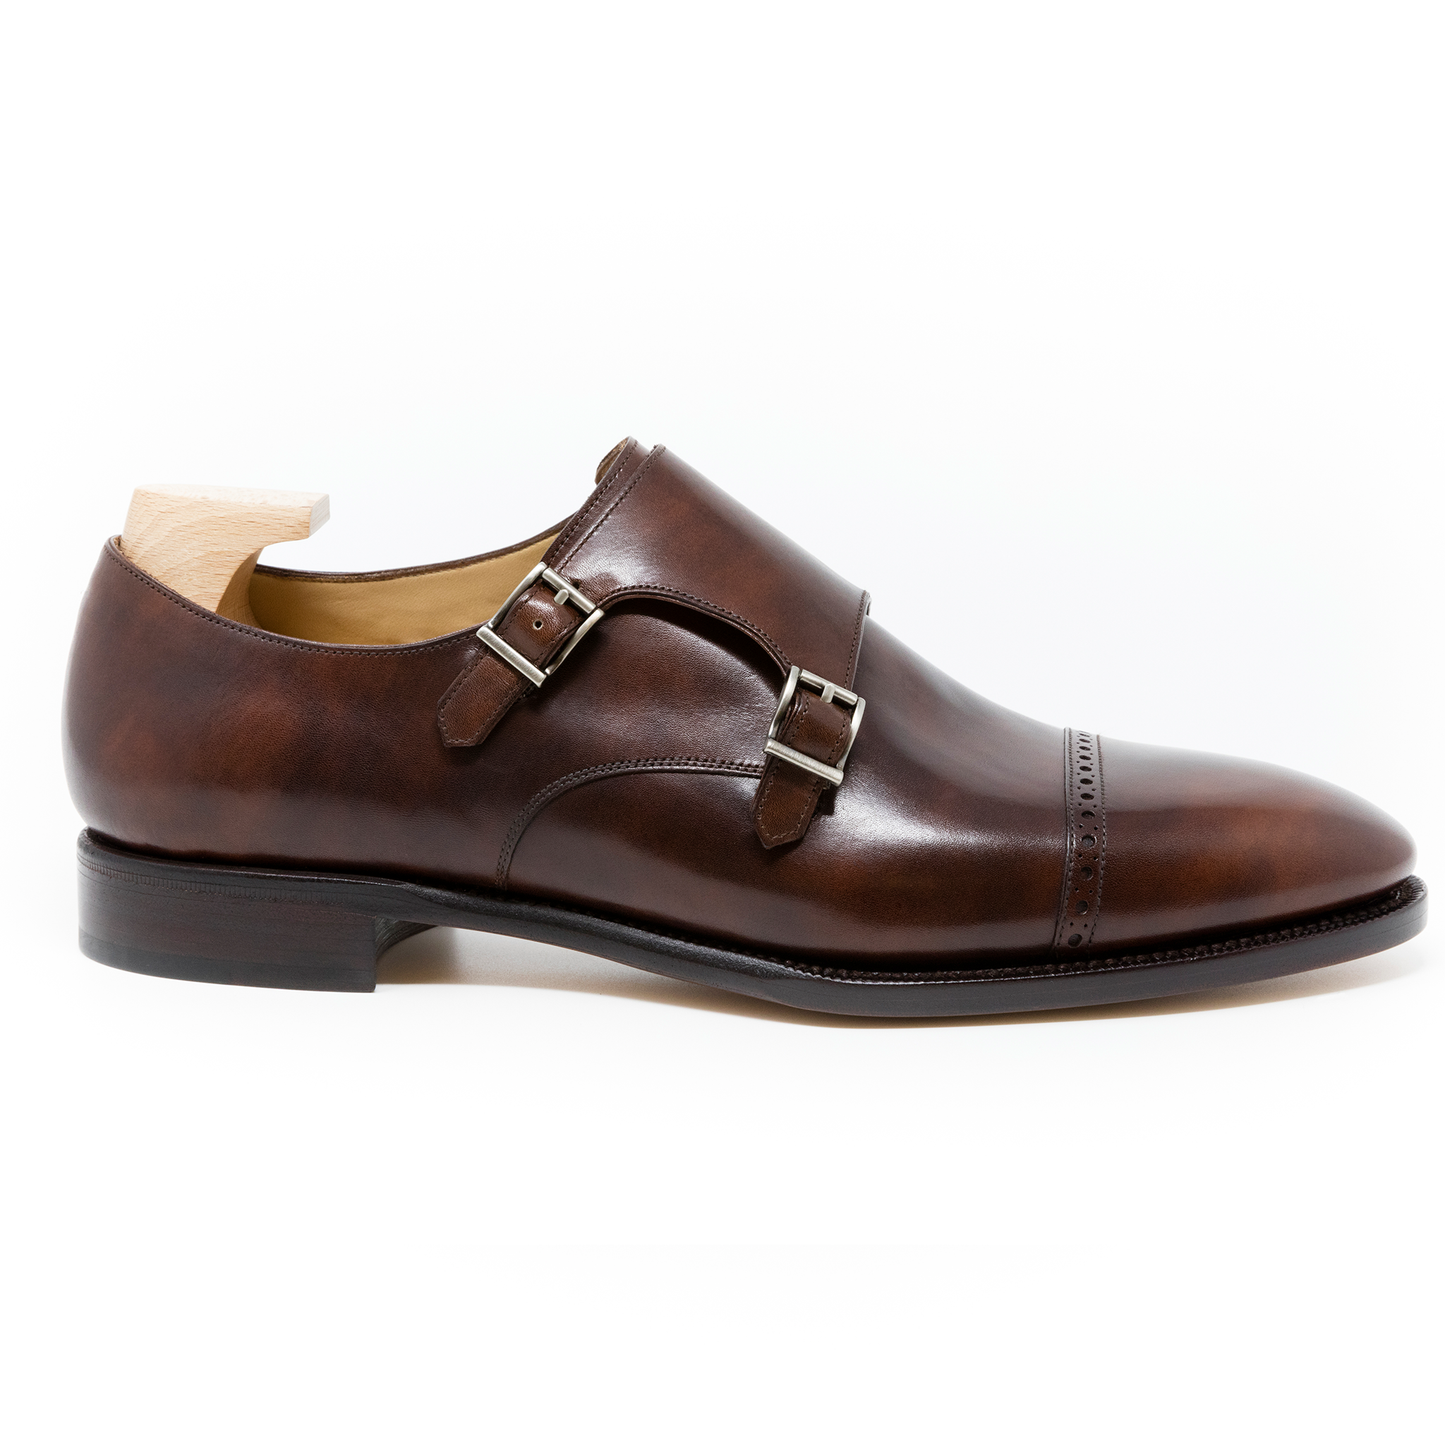 TLB Mallorca leather shoes 123 / GOYA / MUSEUM CALF BROWN